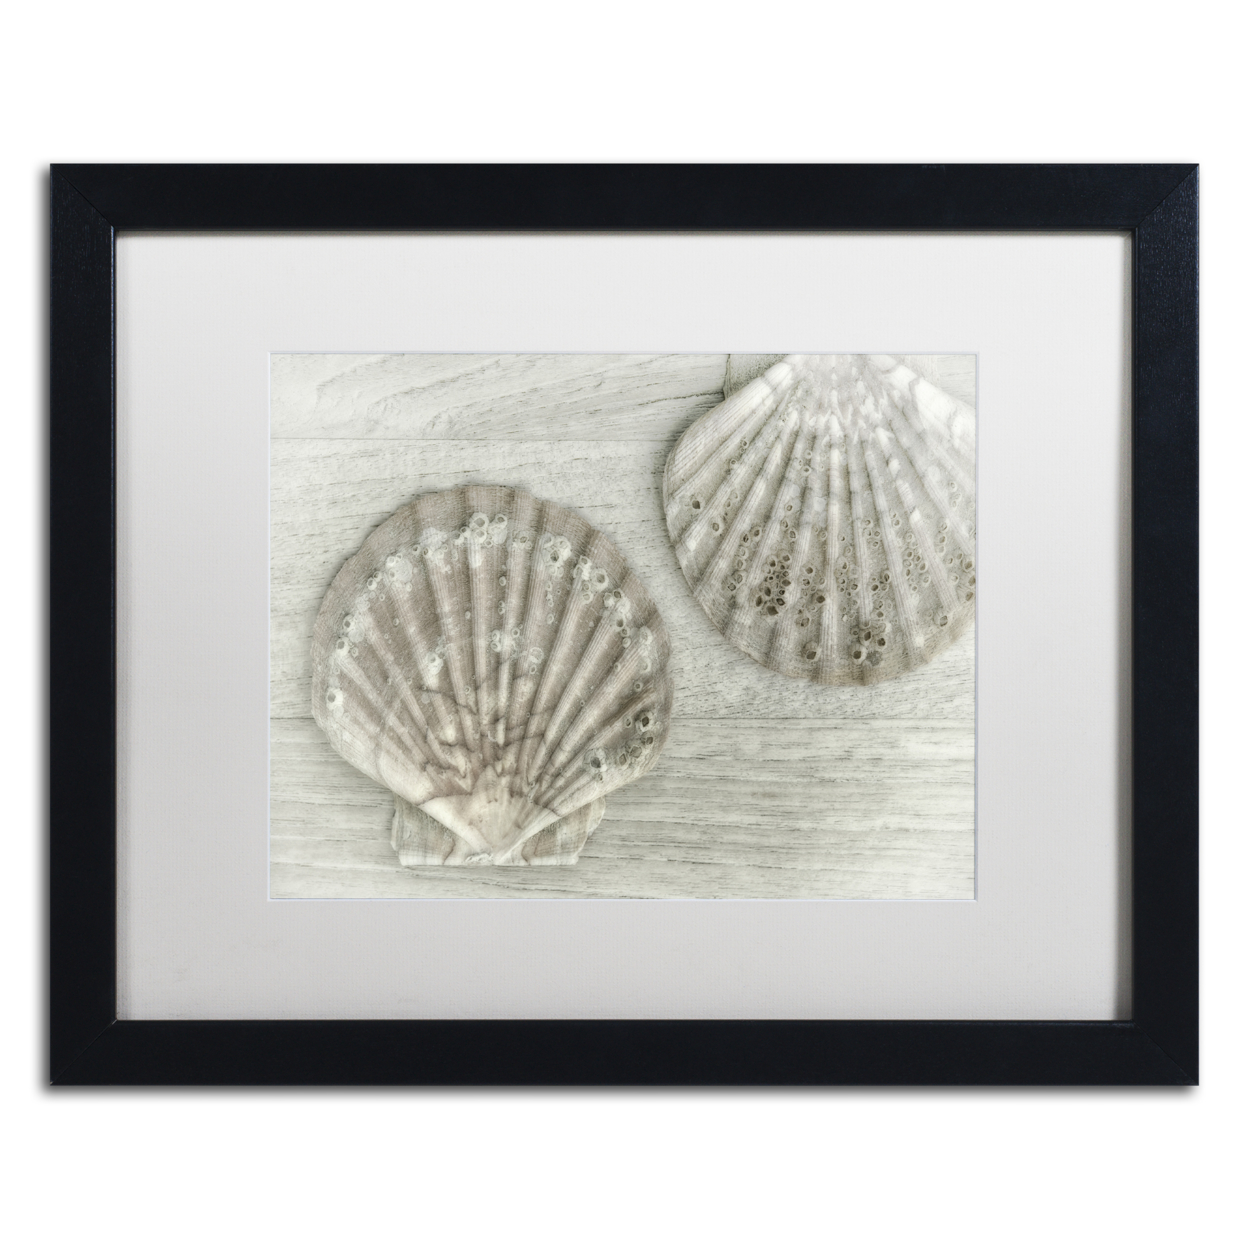 Cora Niele 'Two King Scallop Shells' Black Wooden Framed Art 18 X 22 Inches